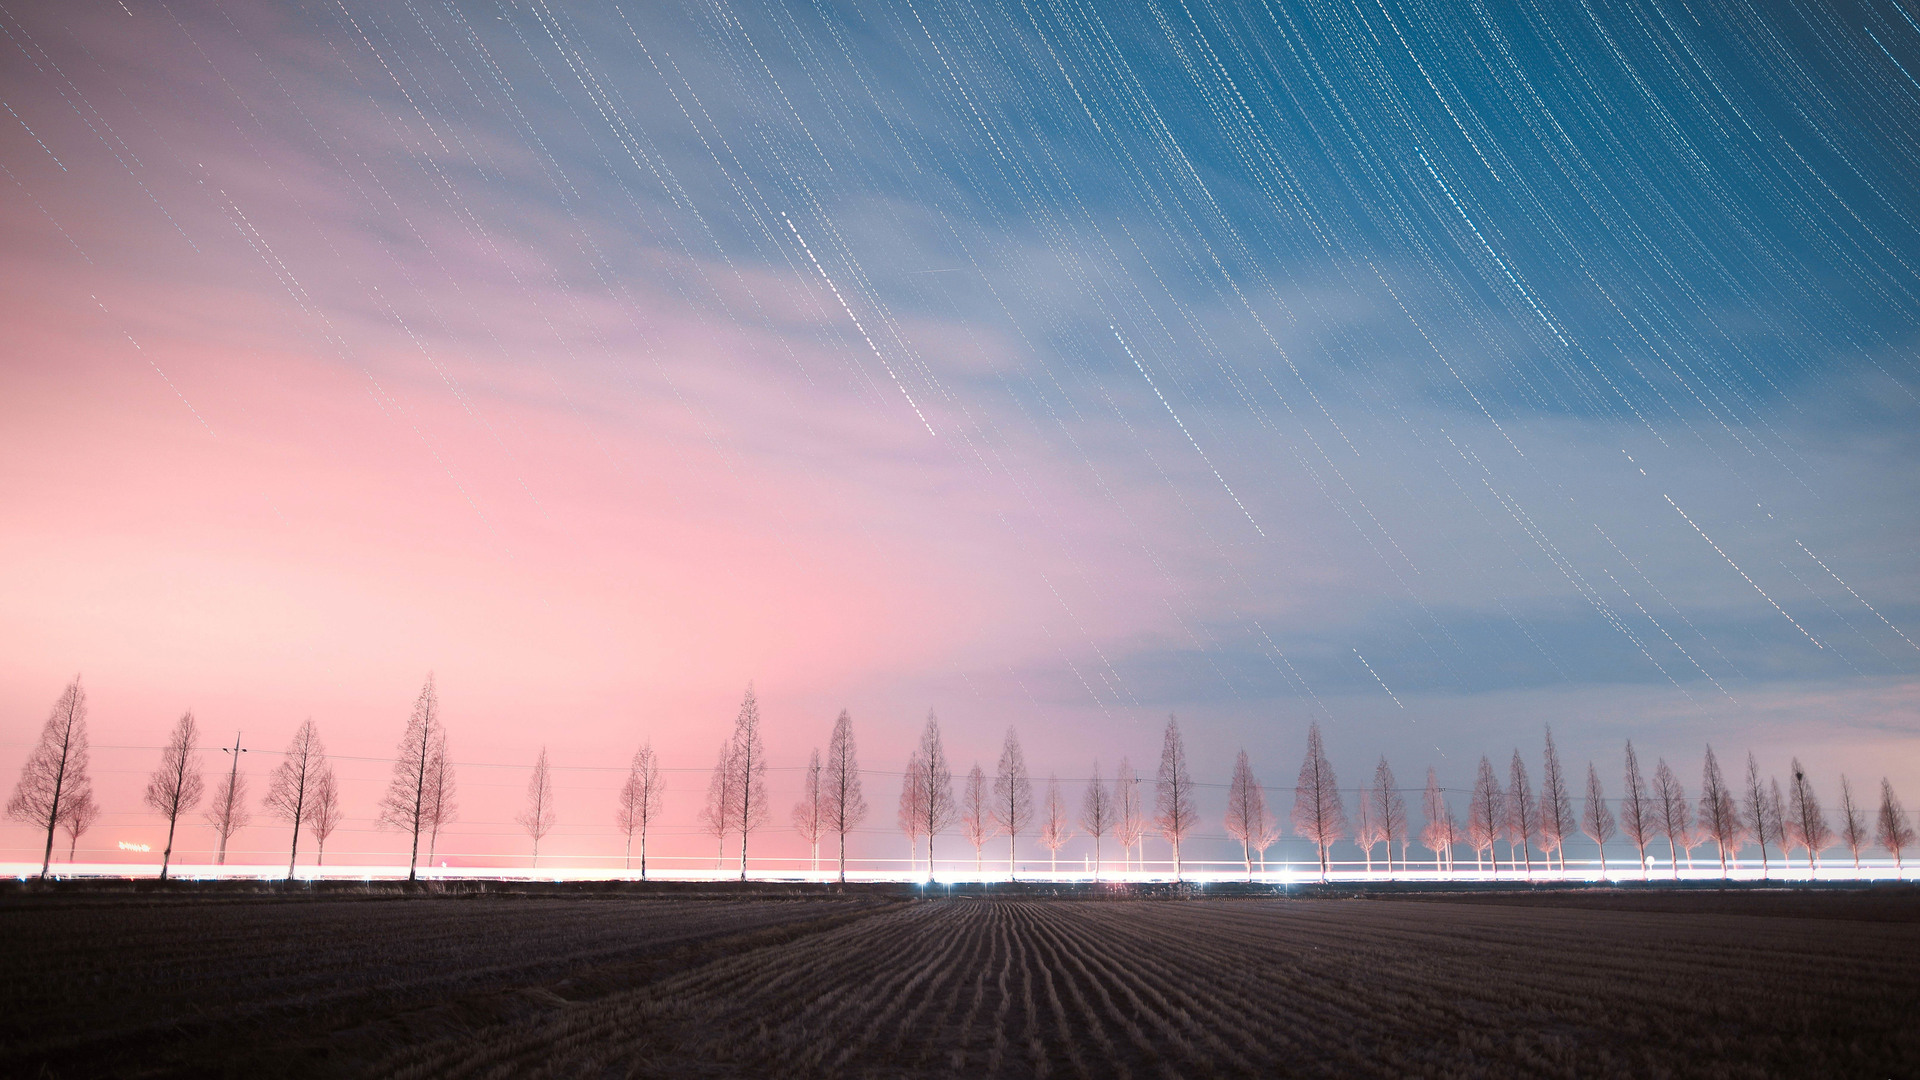 General 1920x1080 nature landscape stars long exposure trees power lines field lights clouds night